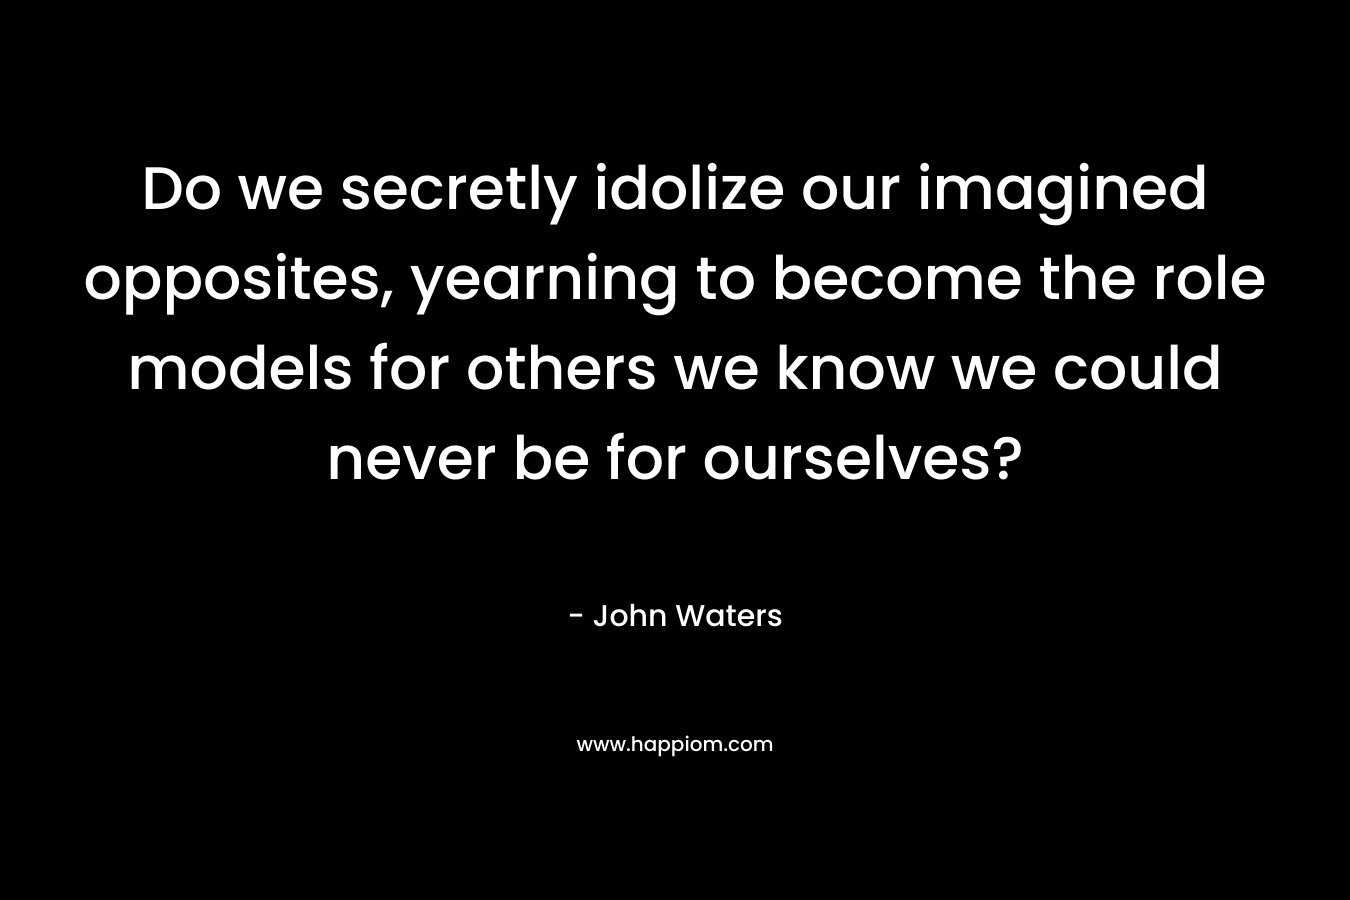 Do we secretly idolize our imagined opposites, yearning to become the role models for others we know we could never be for ourselves? – John Waters